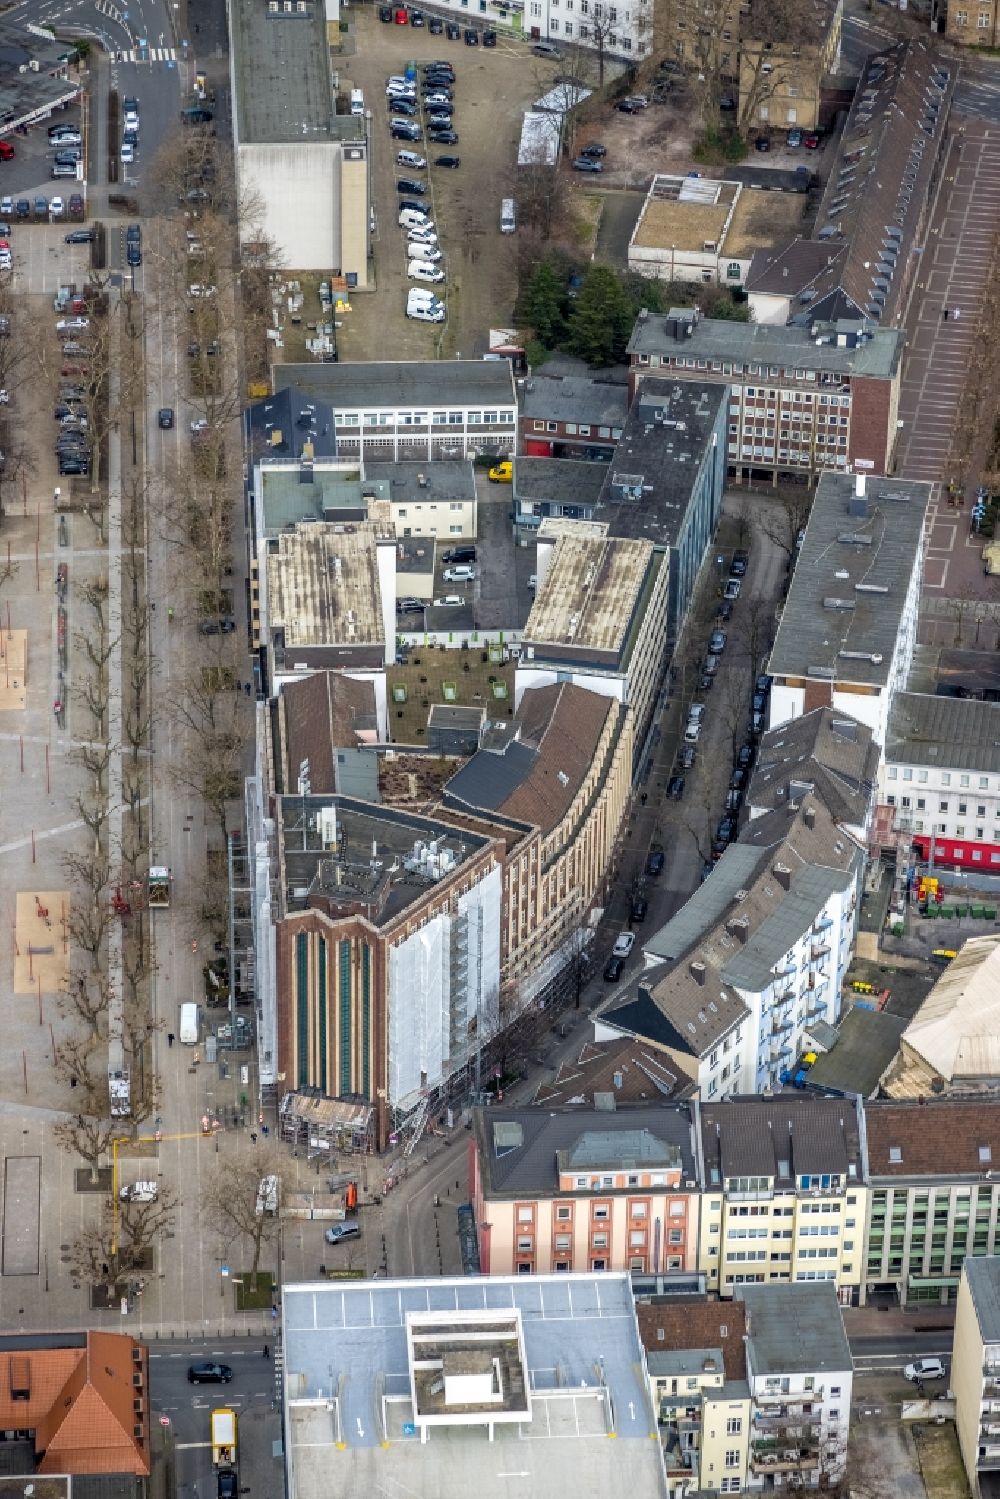 Oberhausen from the bird's eye view: Construction sites for the conversion, expansion and modernization of the adult education center Bert-Brecht-Haus on Paul-Resch-Strasse in Oberhausen in the Ruhr area in the state North Rhine-Westphalia, Germany